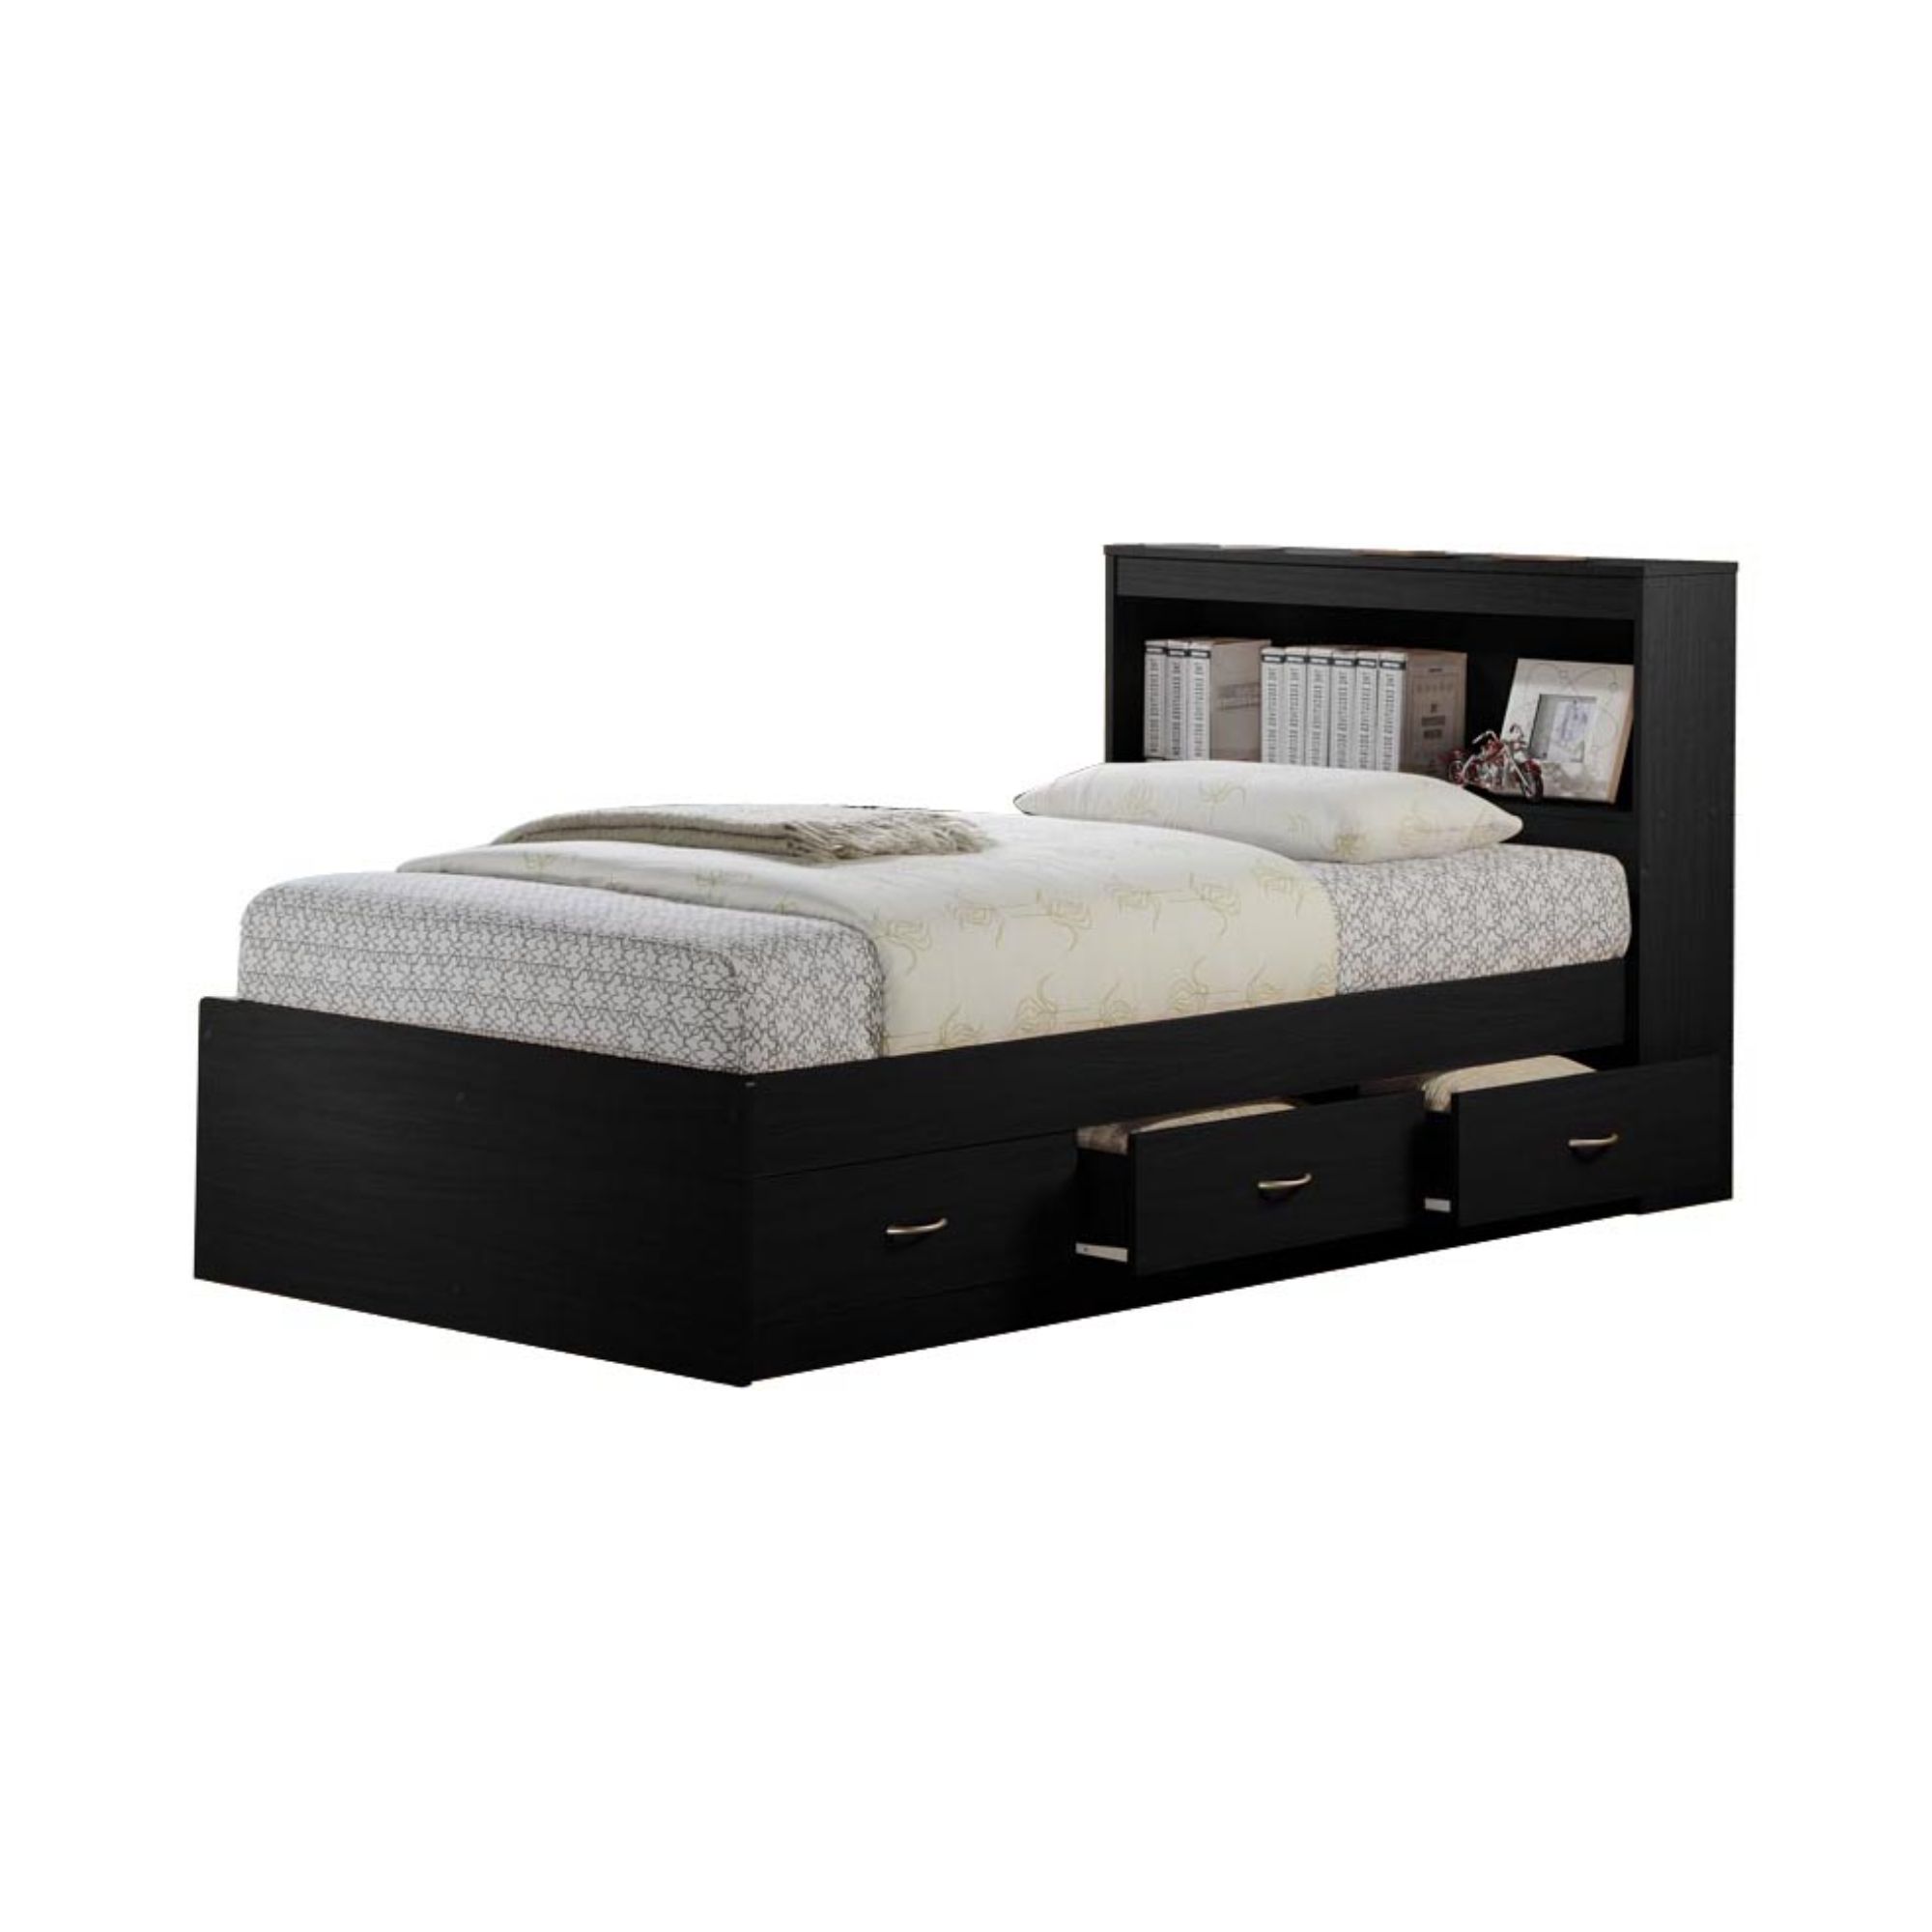 Contemporary Home Living 85.5" Black Captain Bed with 3 Drawers and Headboard - Twin Size